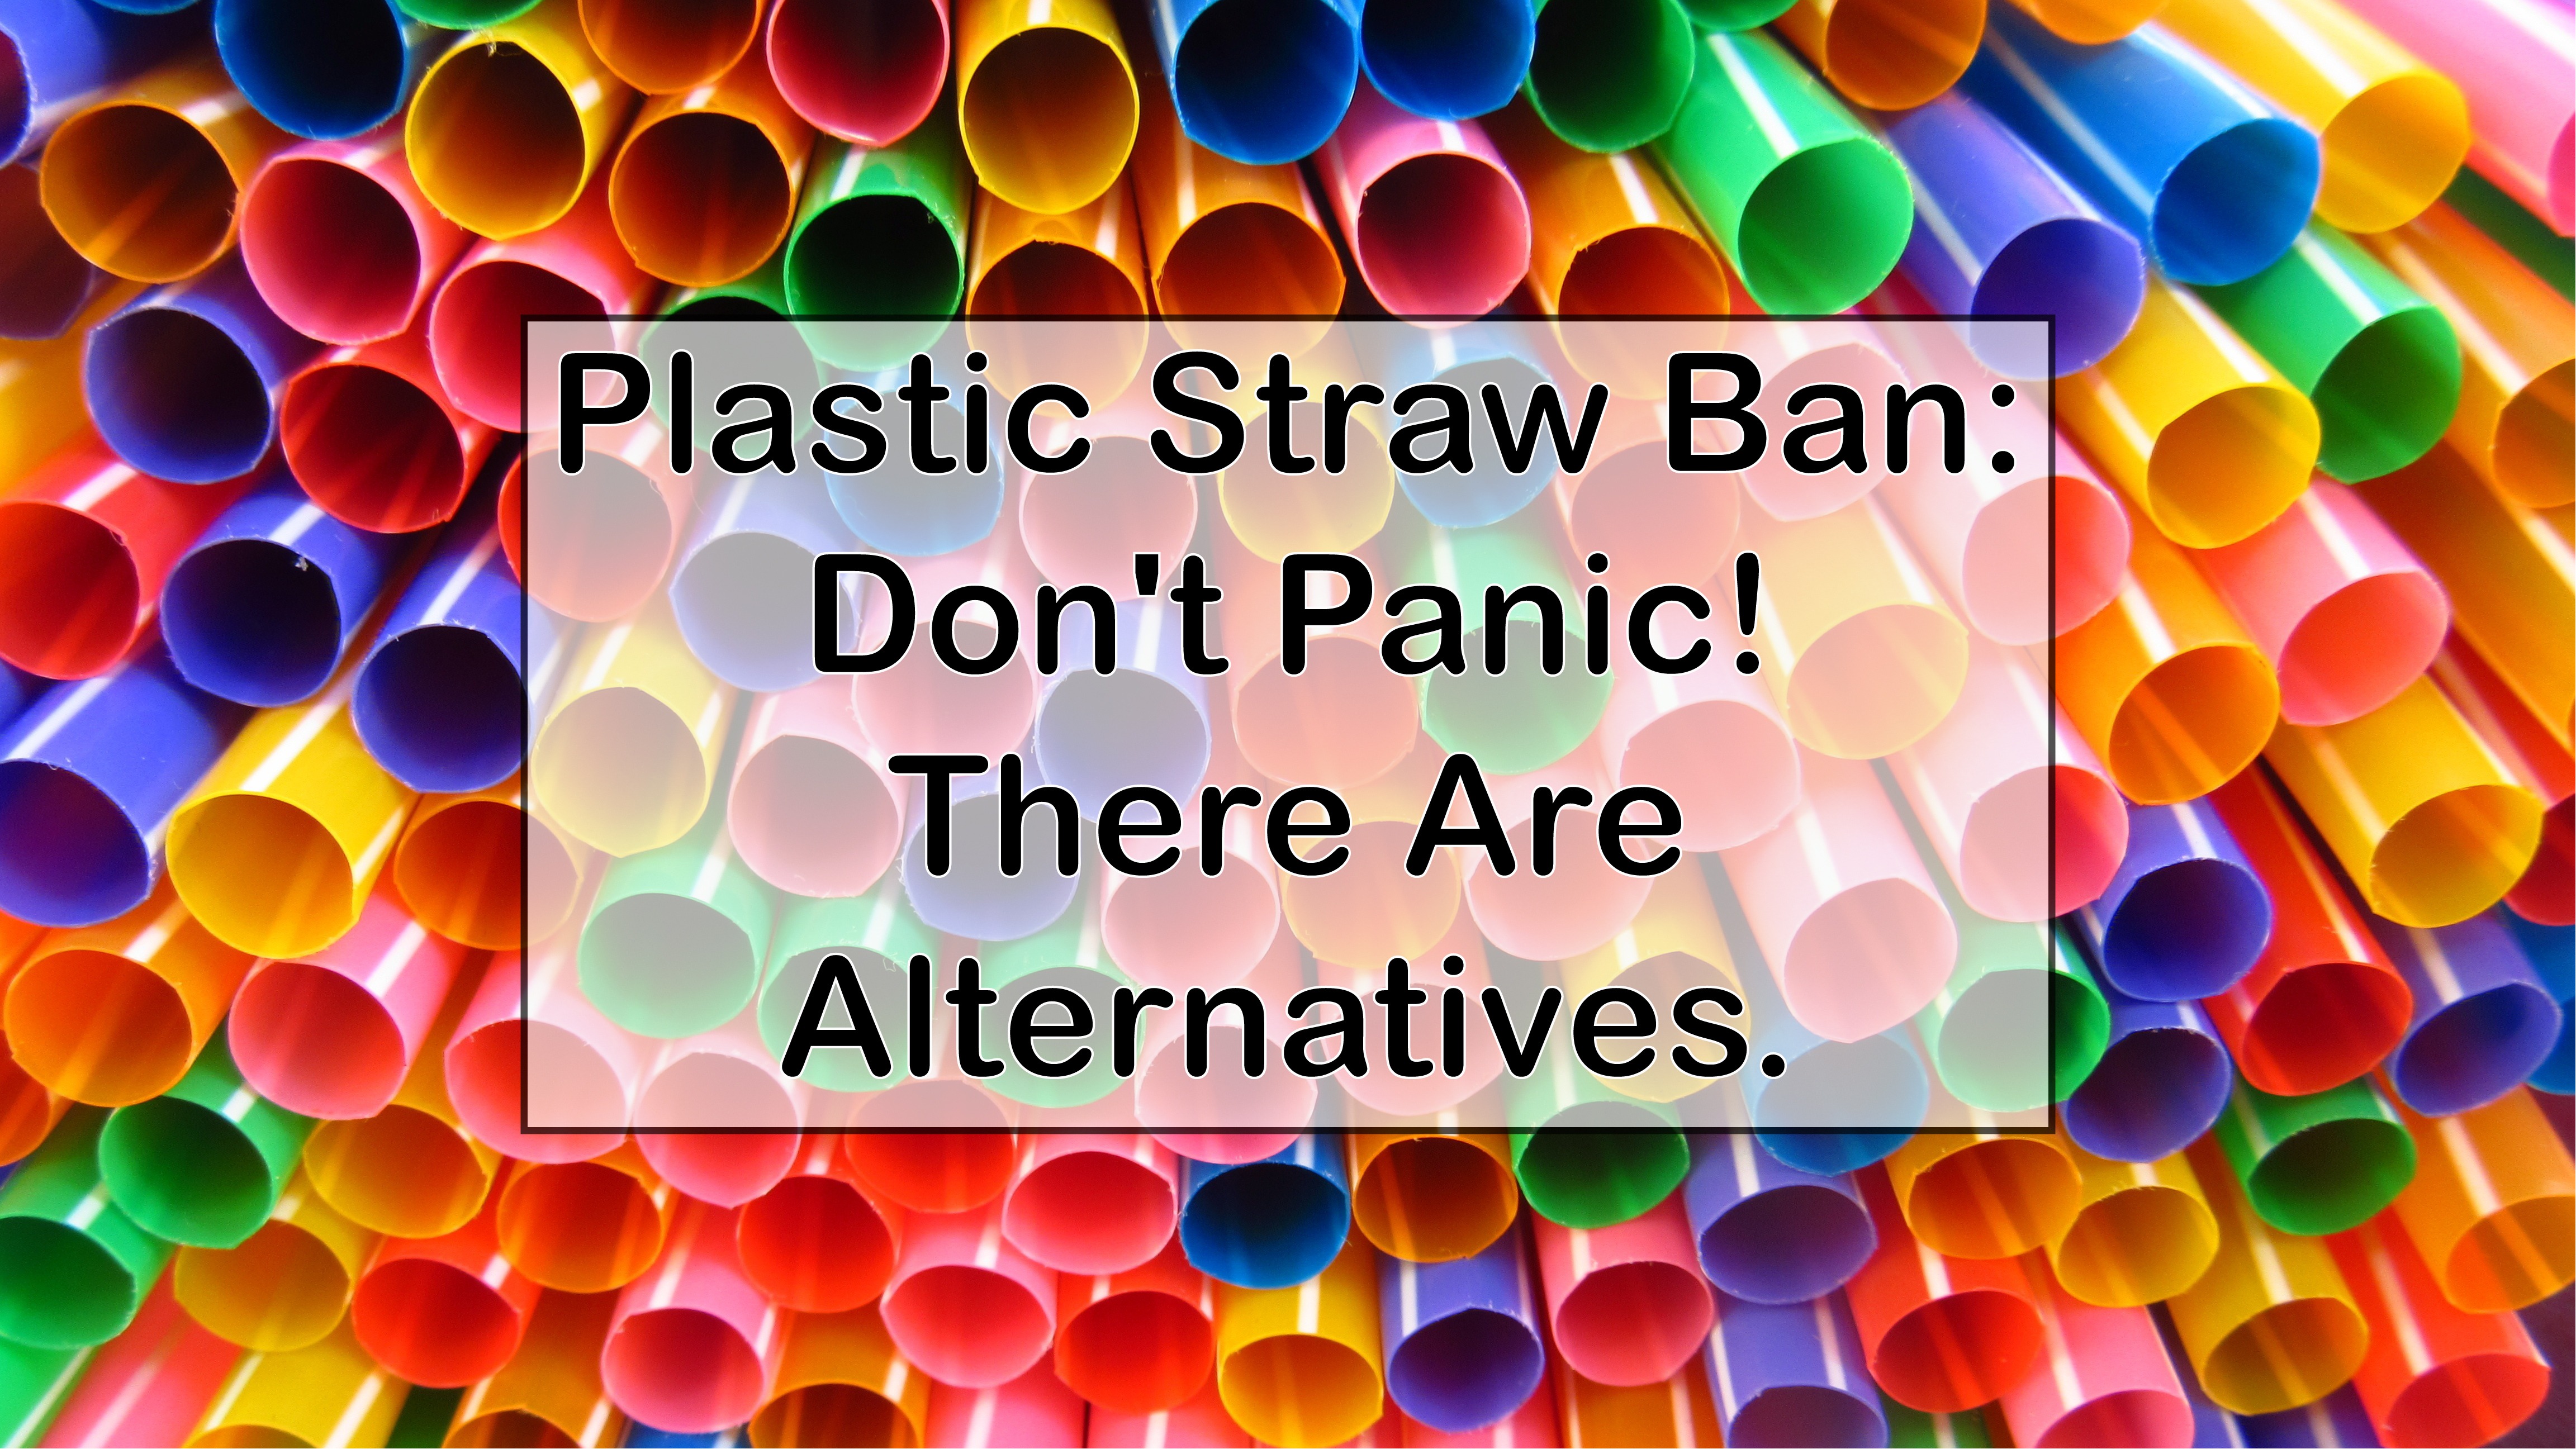 Plastic Straw Ban: Don’t Panic! There Are Alternatives